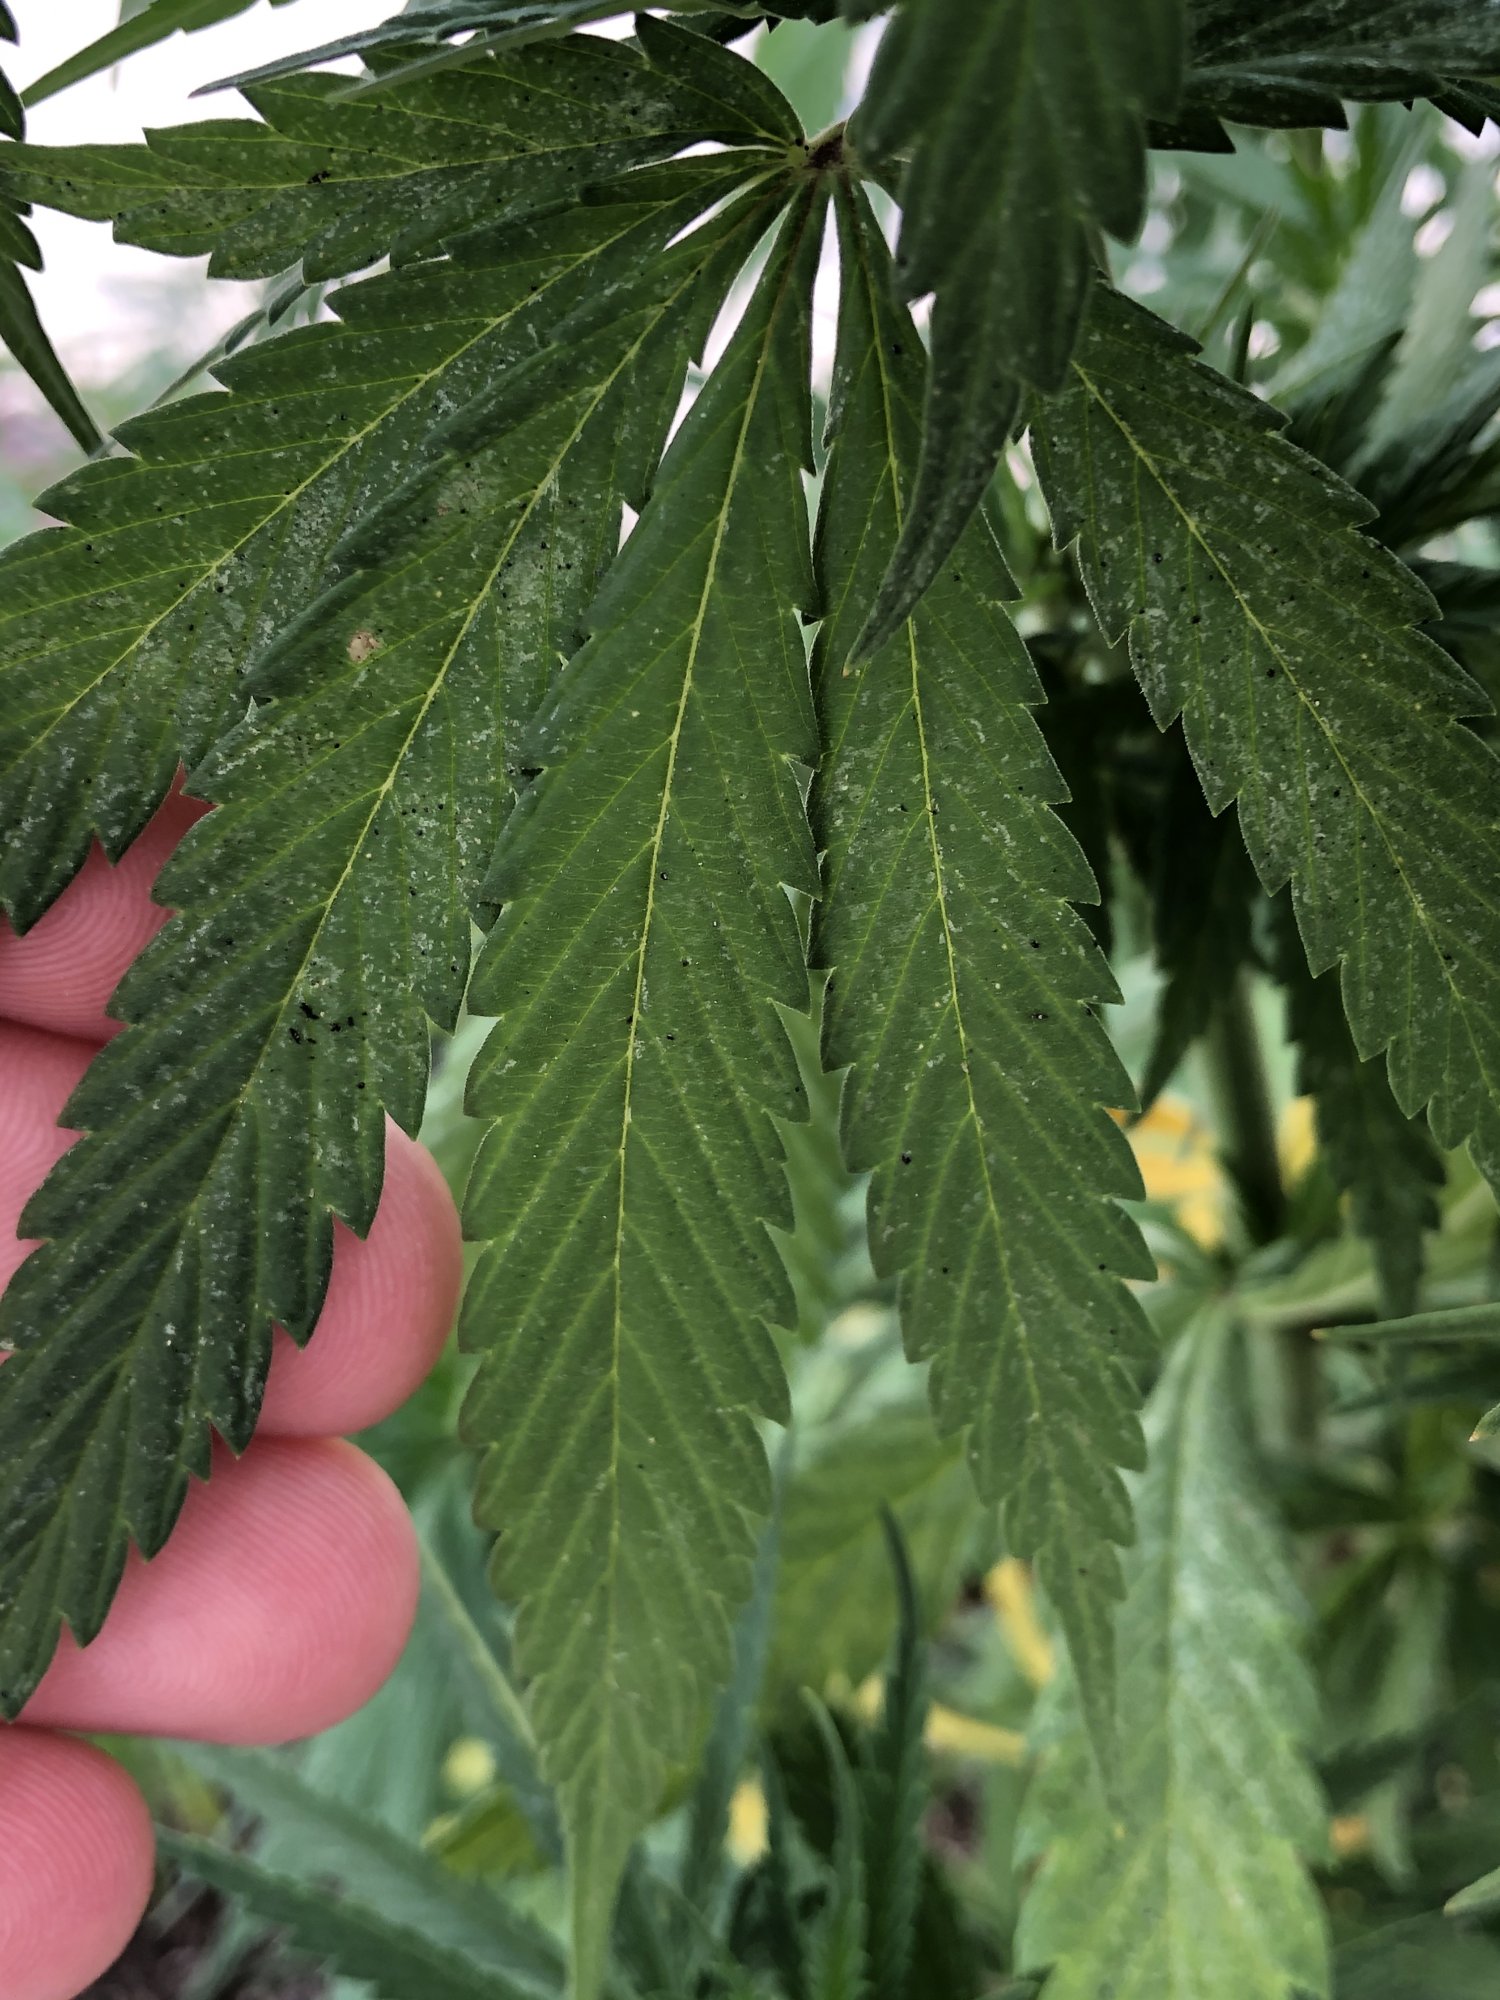 Black spots on leaves and stems please help 8